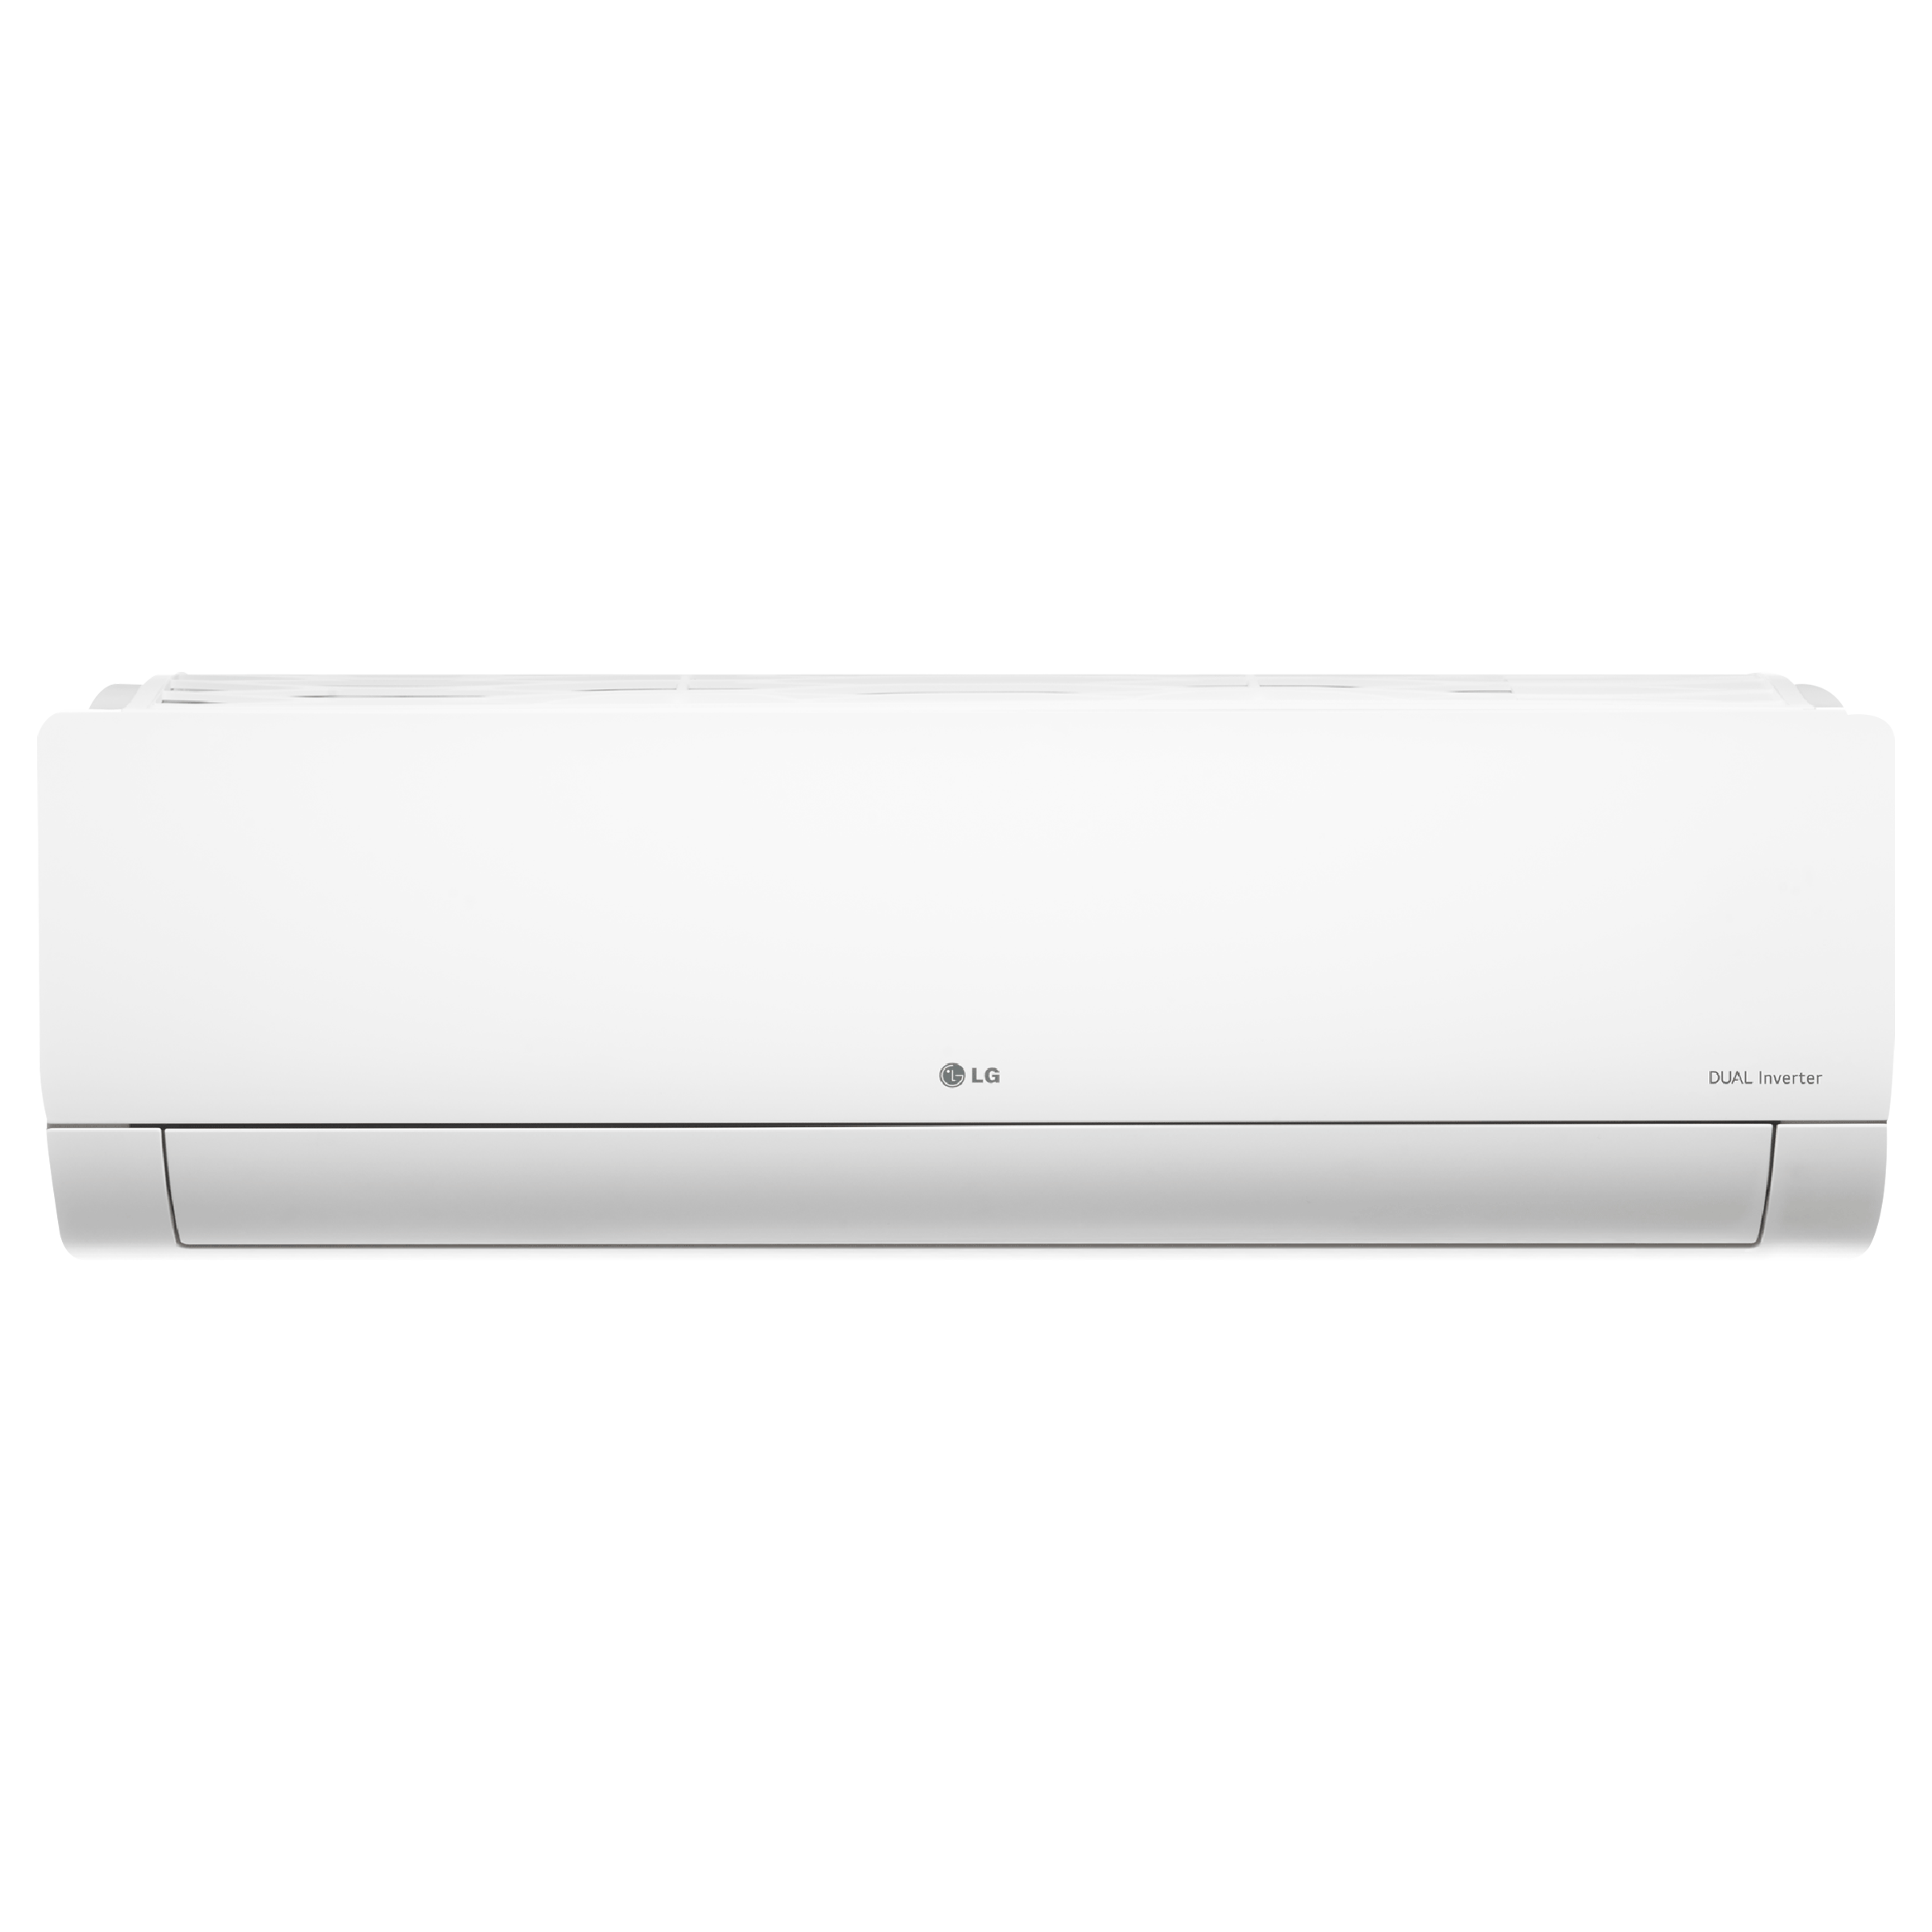 LG 6 in 1 Convertible 2 Ton 3 Star Dual Inverter Split AC with HD Filter (2021 Model, Copper Condenser, PS-Q24HNXE)